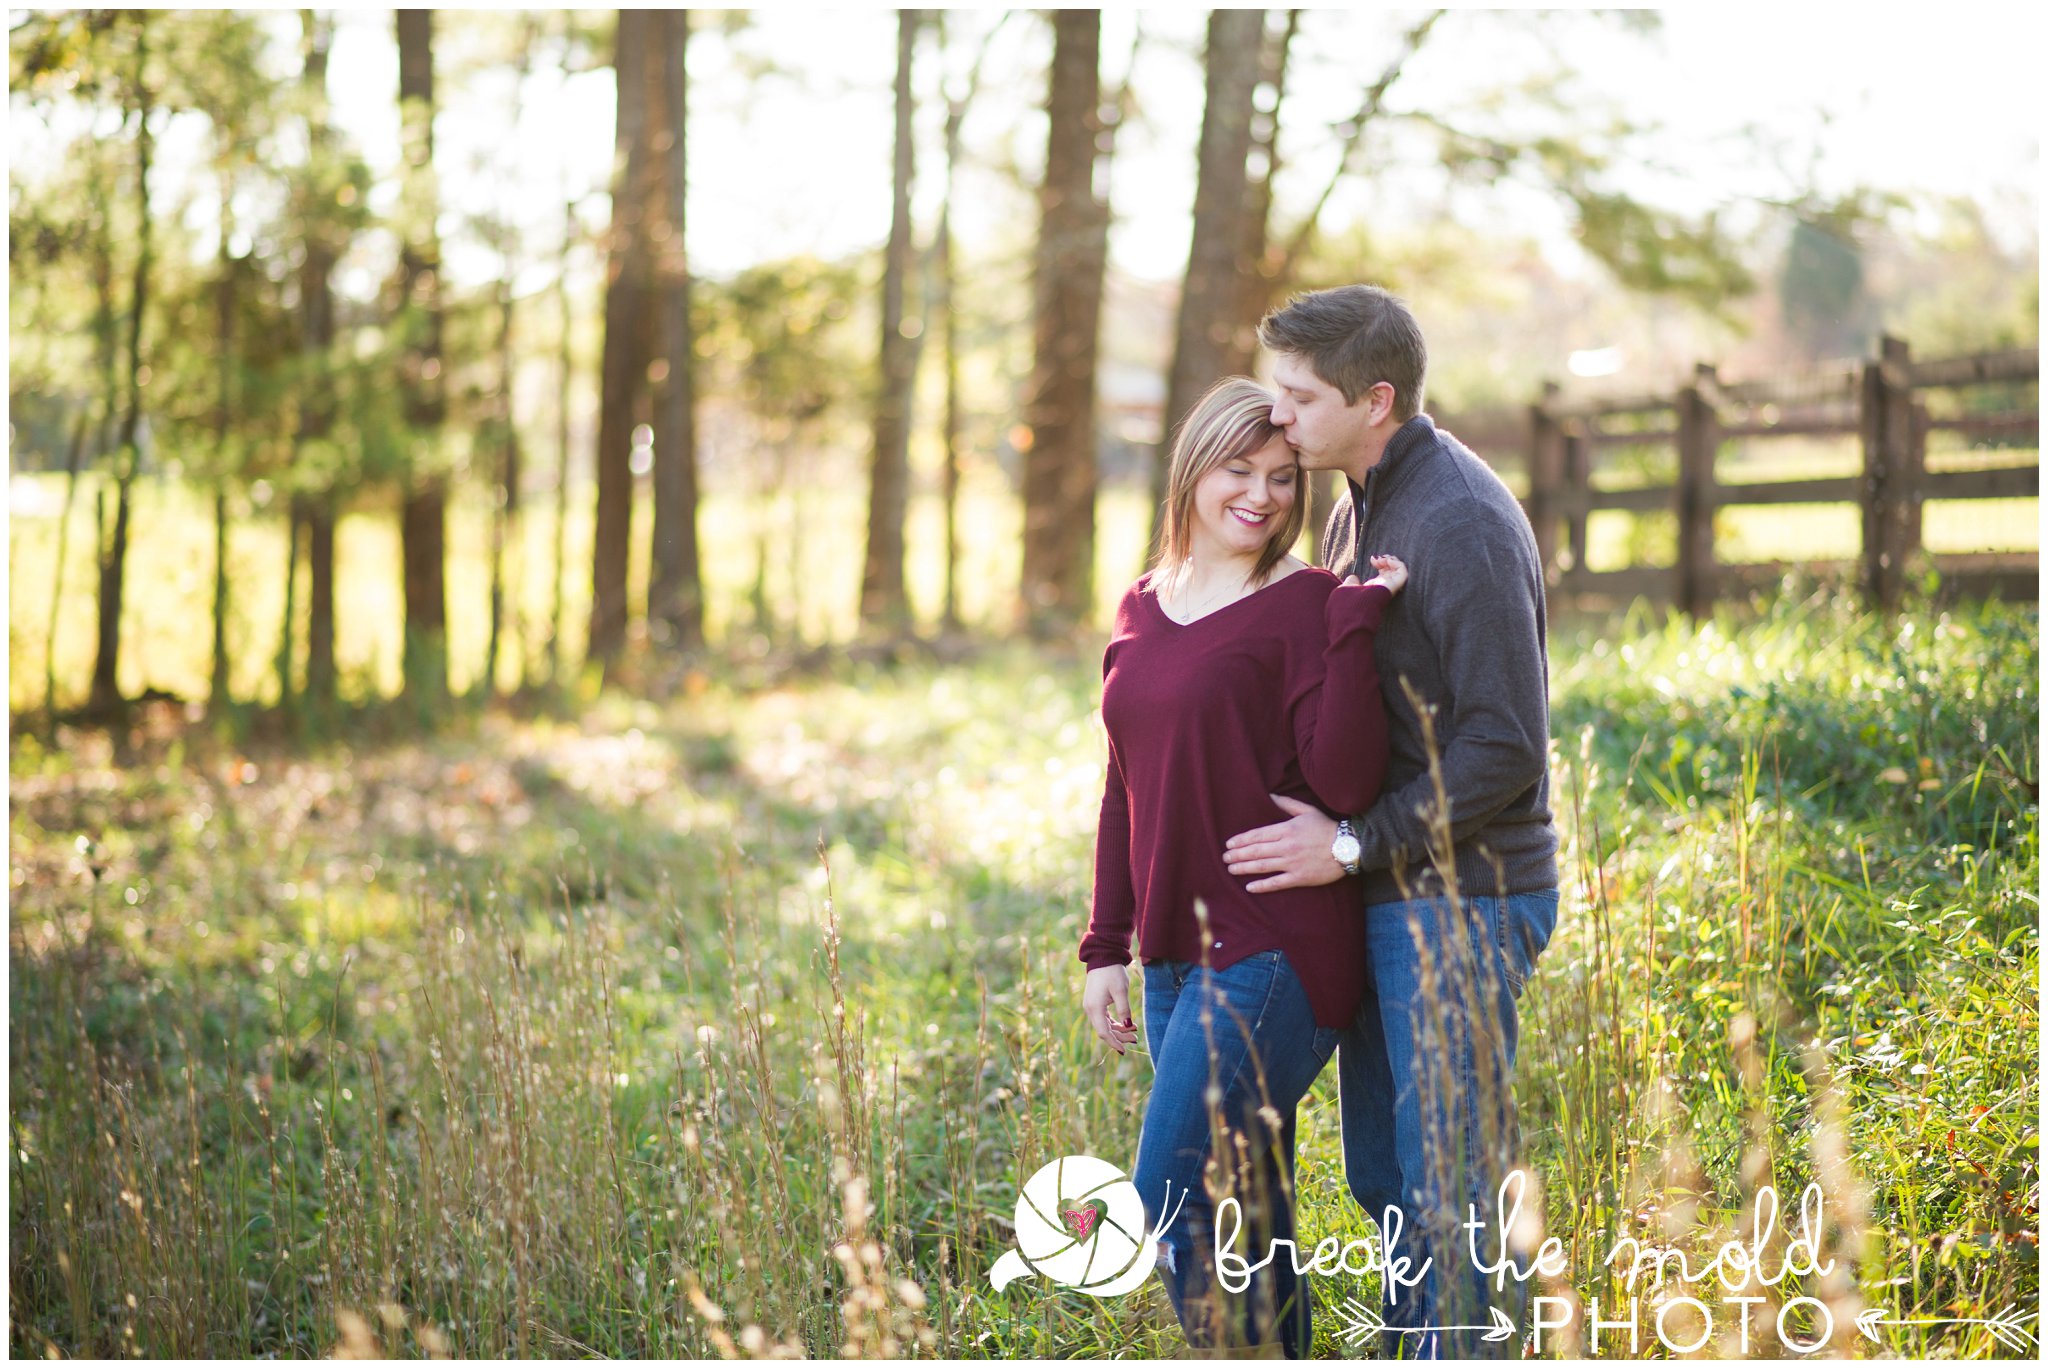 break-the-mold-photo-field-country-engagement-winter-shoot_6632.jpg